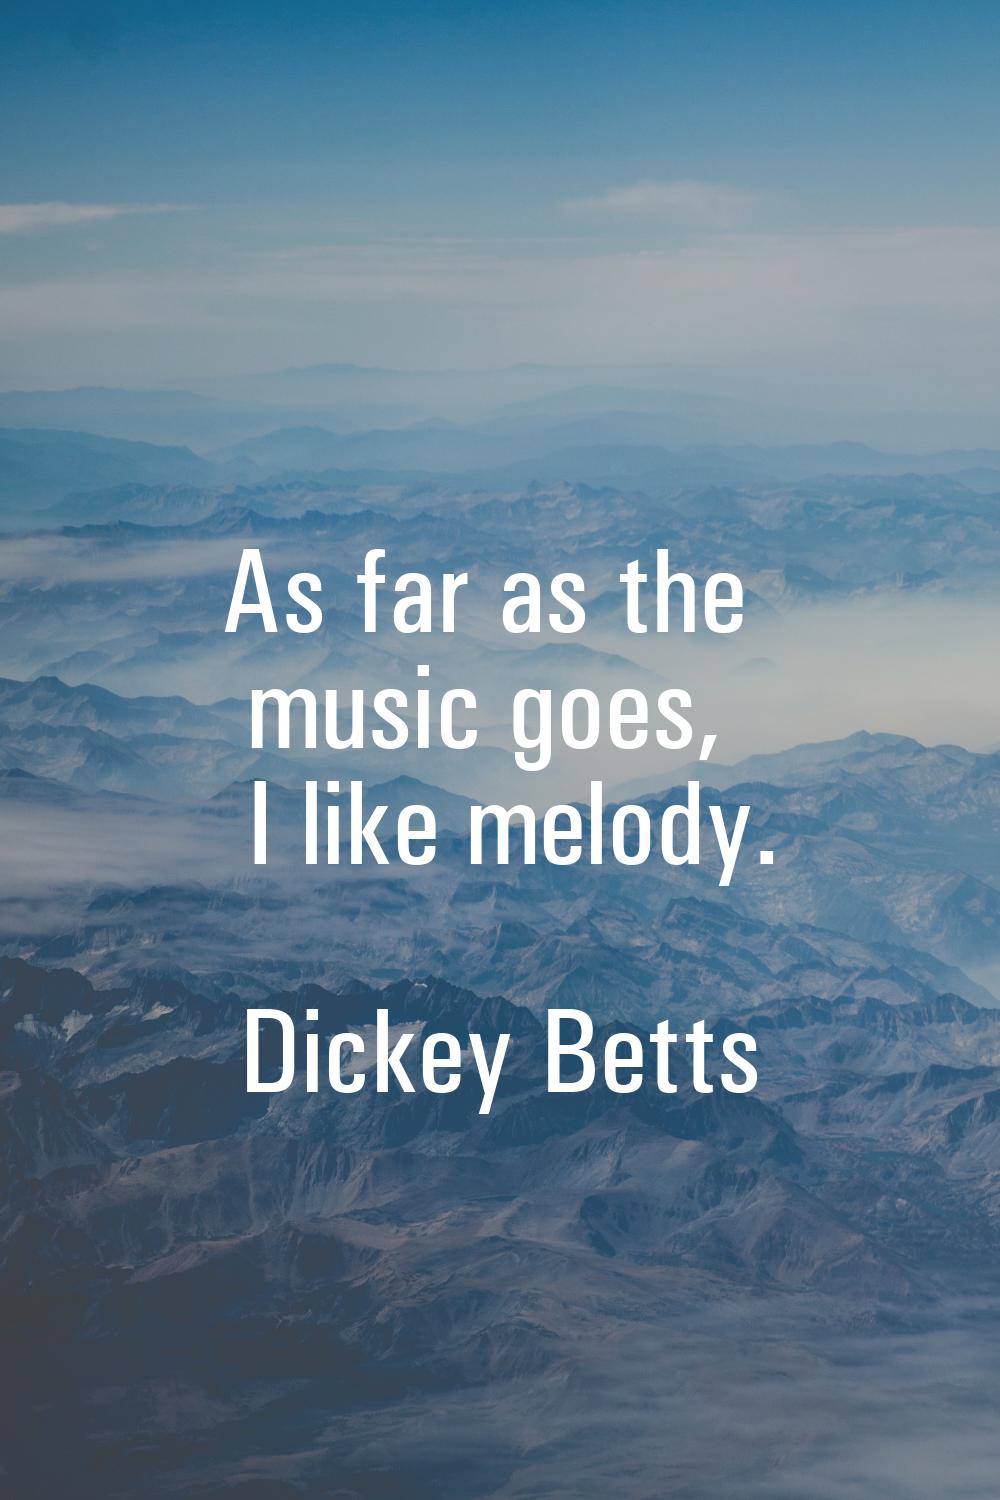 As far as the music goes, I like melody.